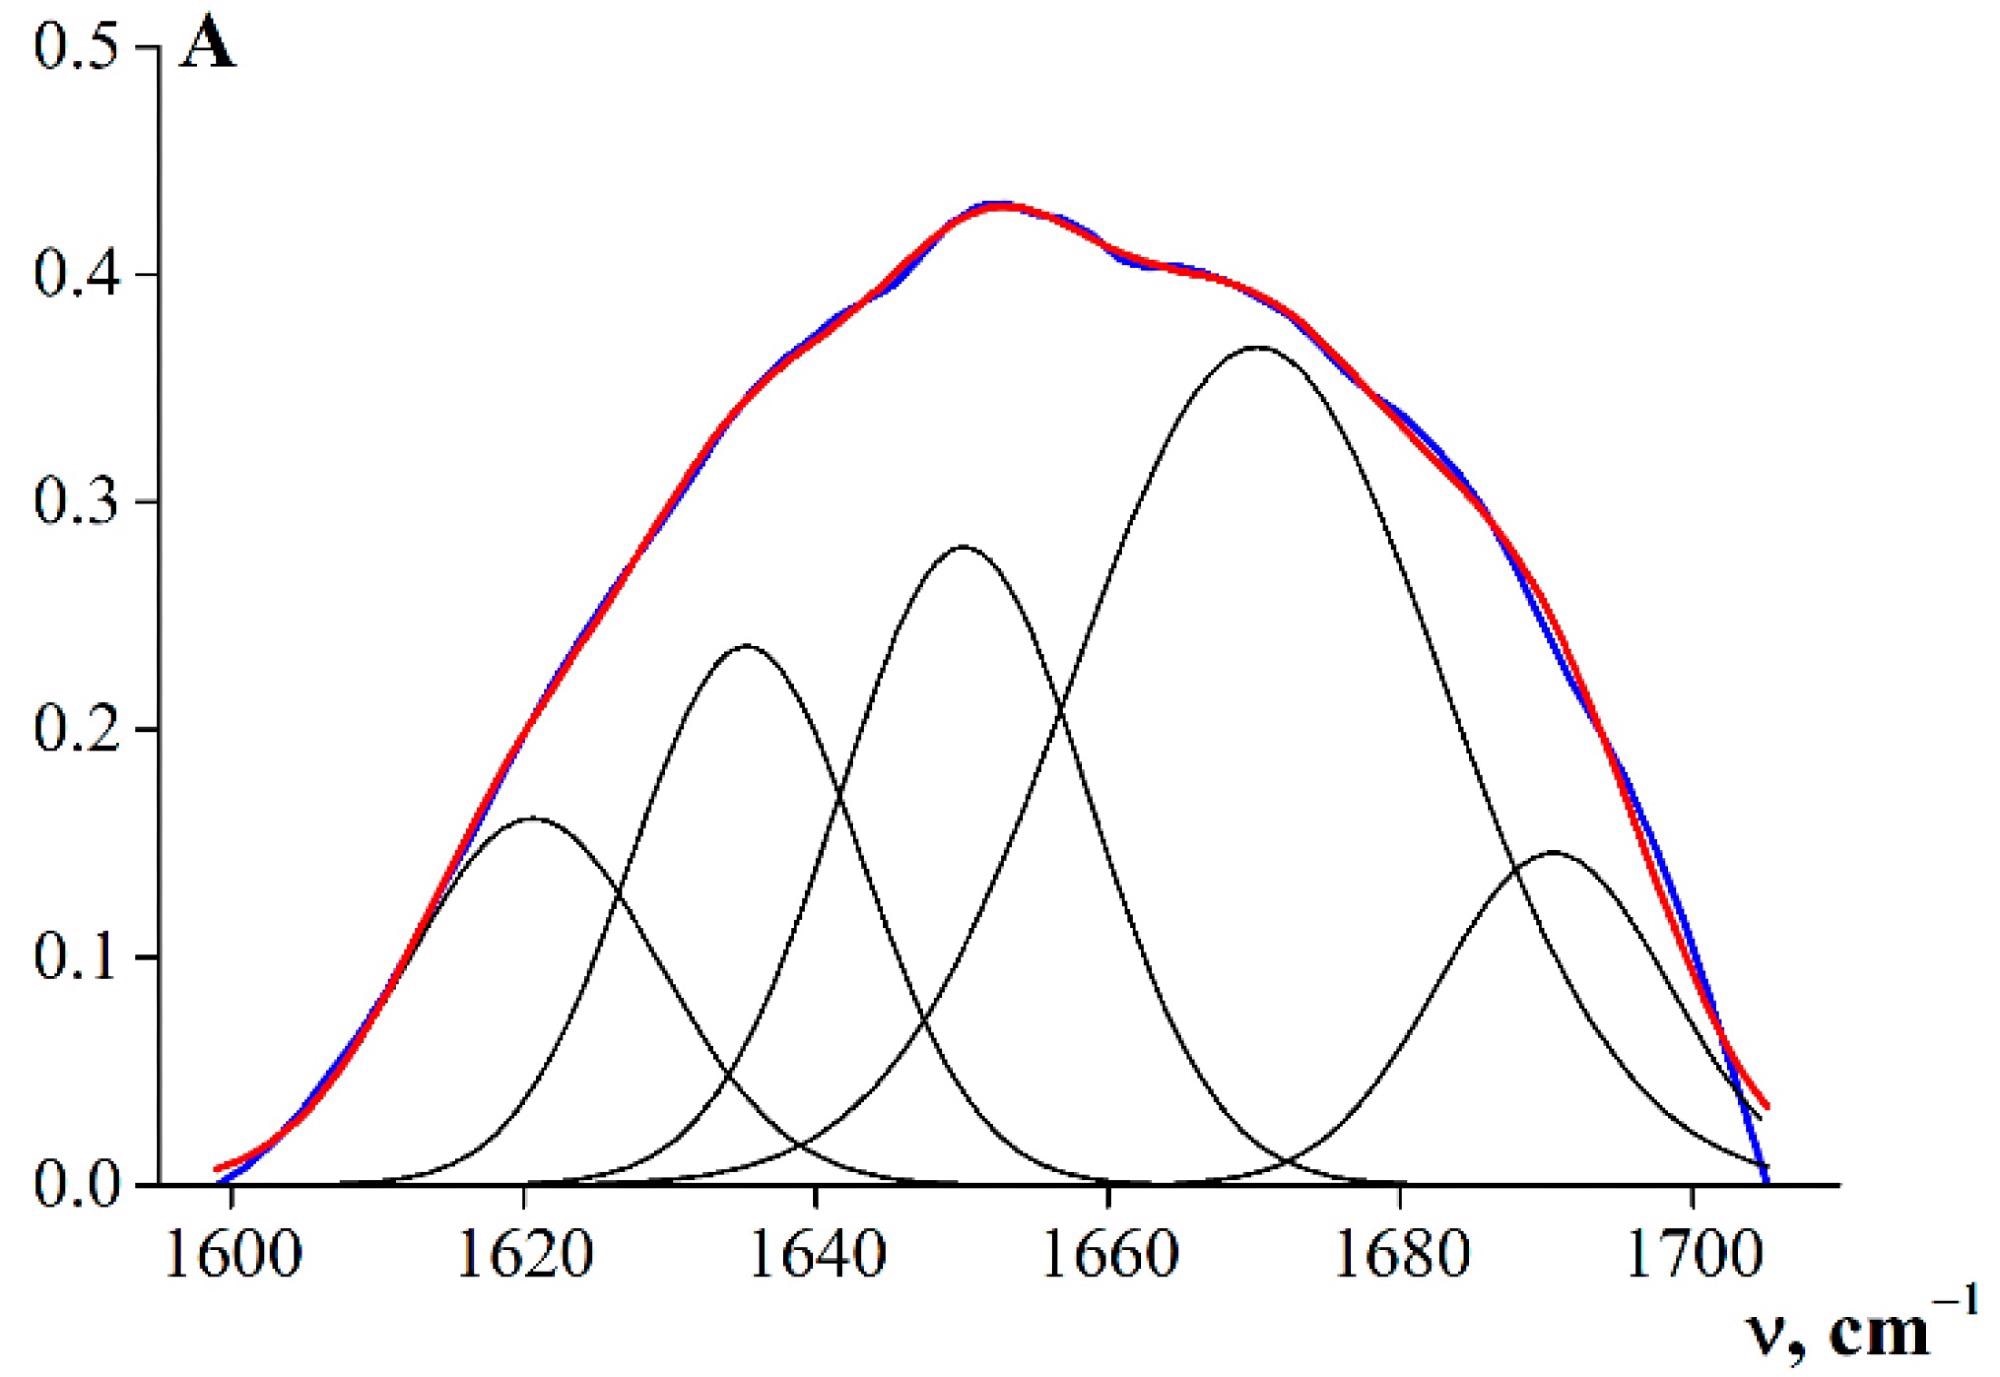 Decomposition of the band components of the amide I band using a Gaussian distribution (R2 = 0.99).